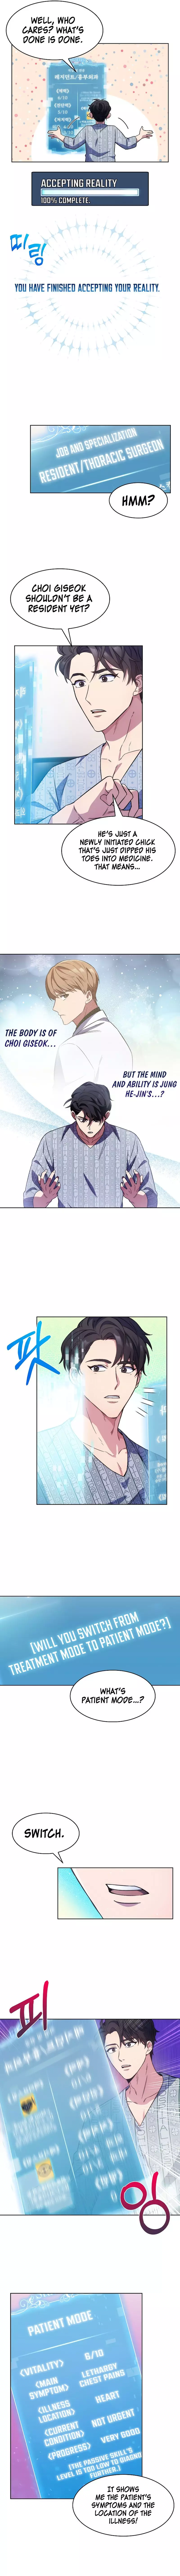 Level-Up Doctor (Manhwa) - 2 page 4-00a2c8db